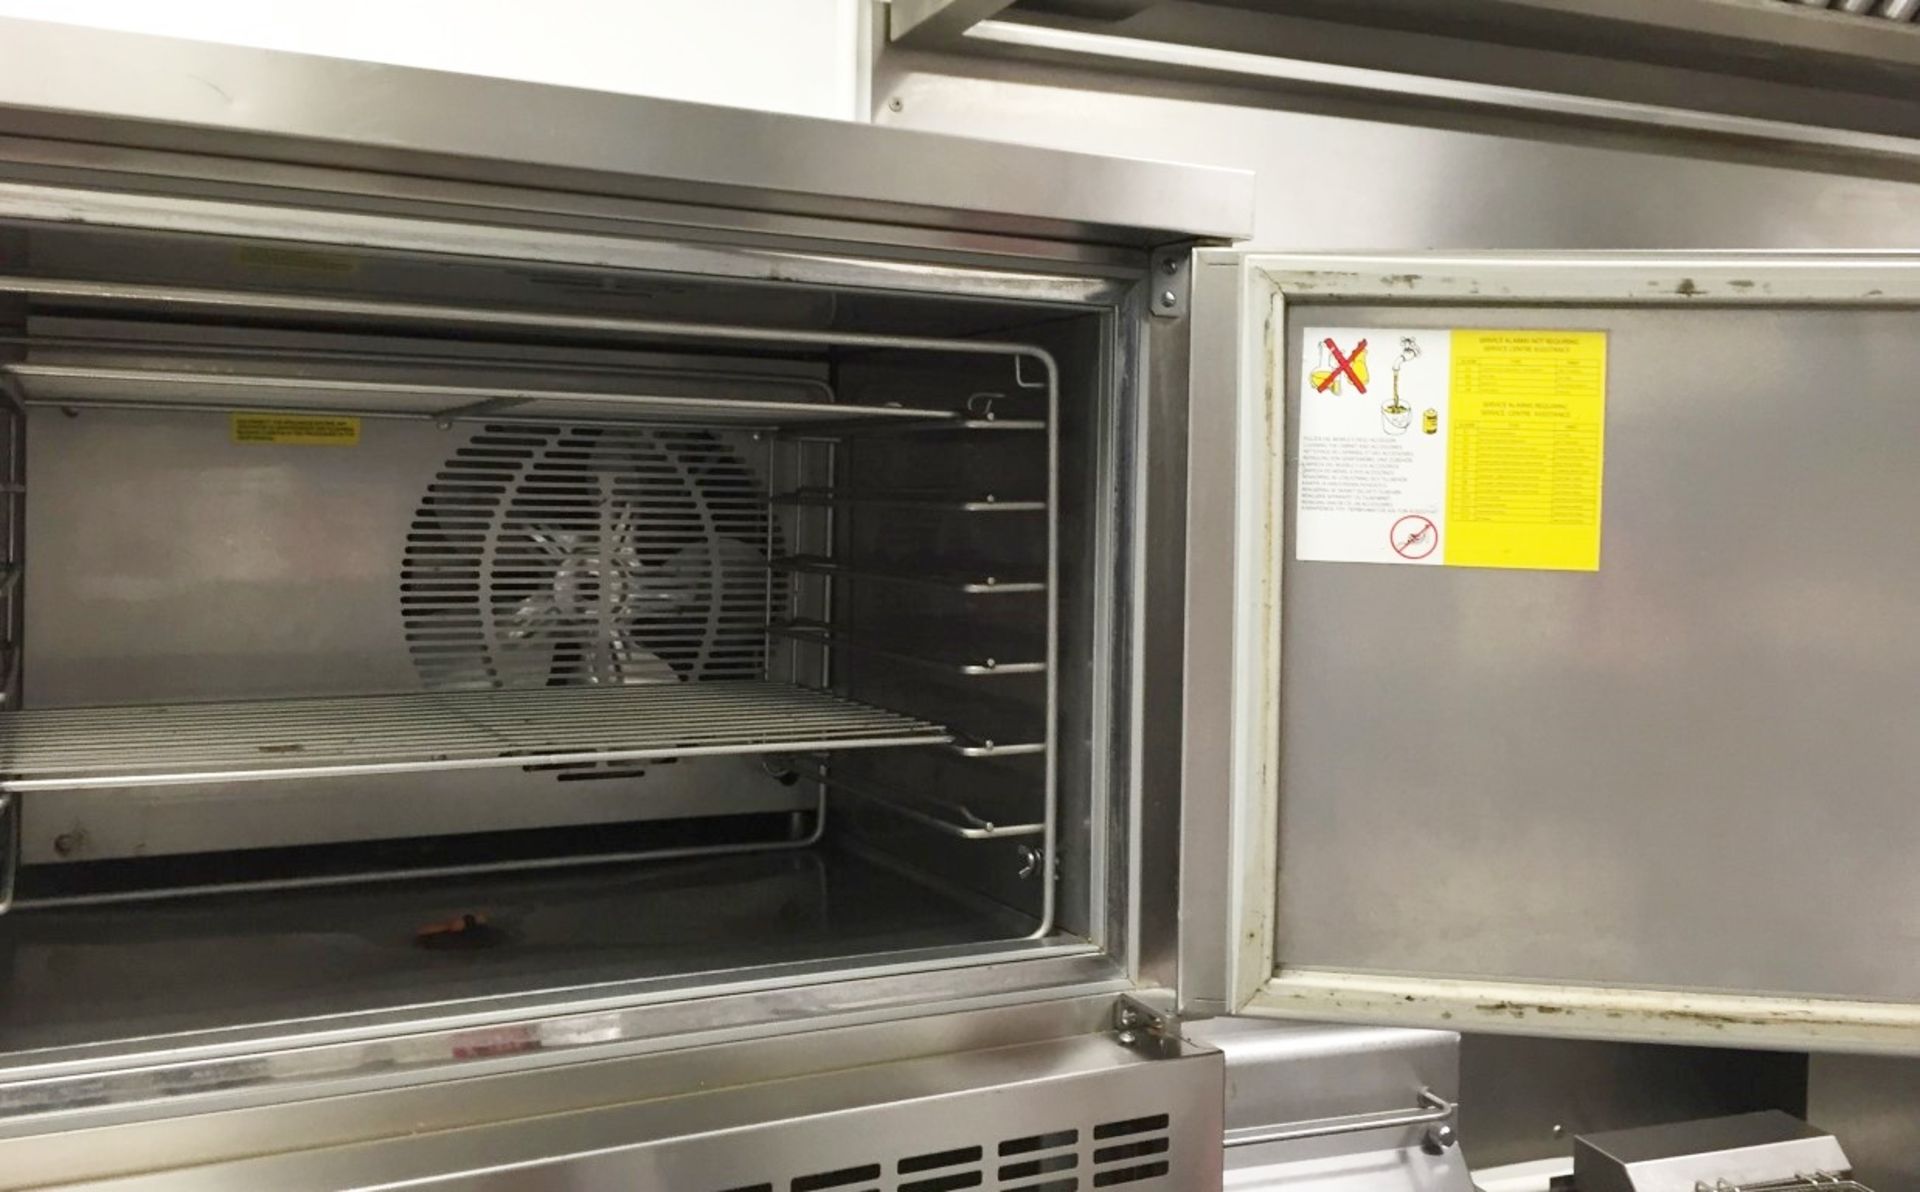 1 x Electrolux BLAST CHILLER Cabinet - Model RBC051 - Used For Rapid Chilling of Pre Processed - Image 4 of 7